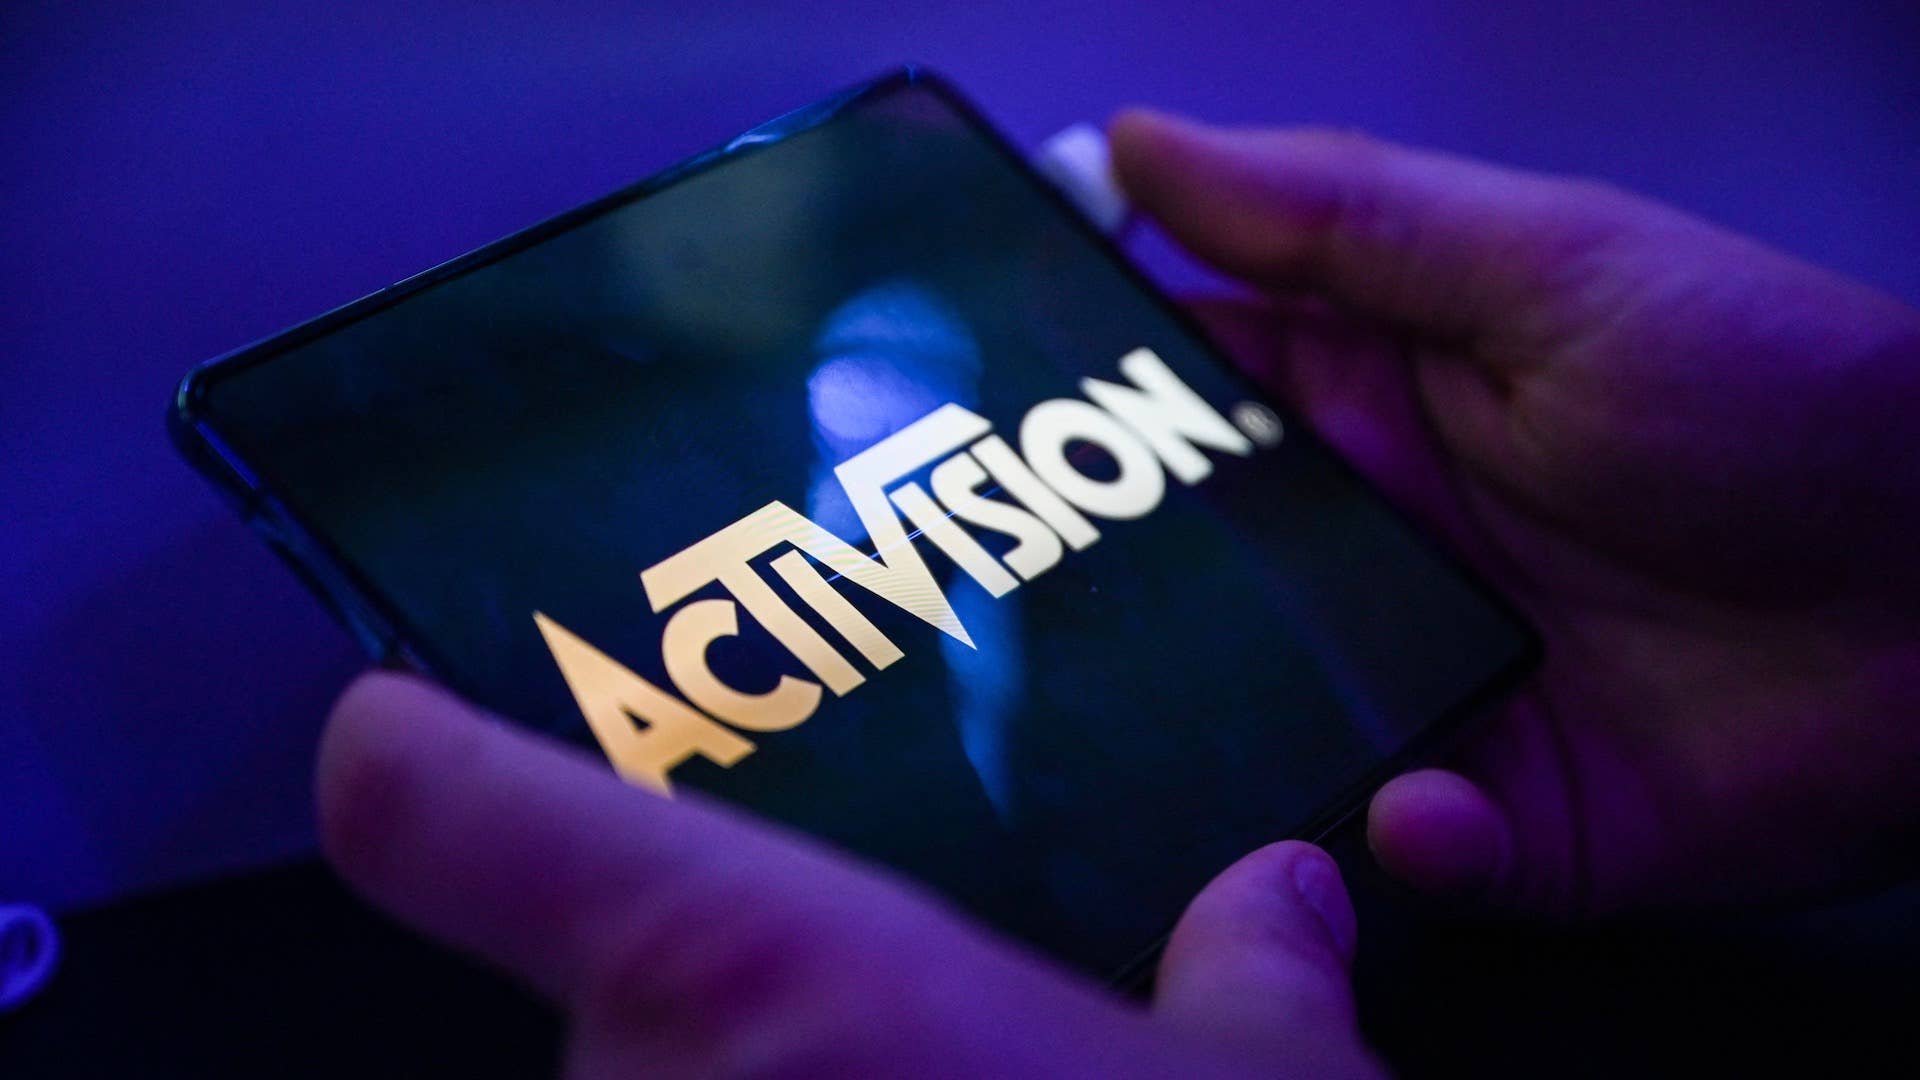 A visitor plays the game 'Call of Duty' of Activision on a mobile phone